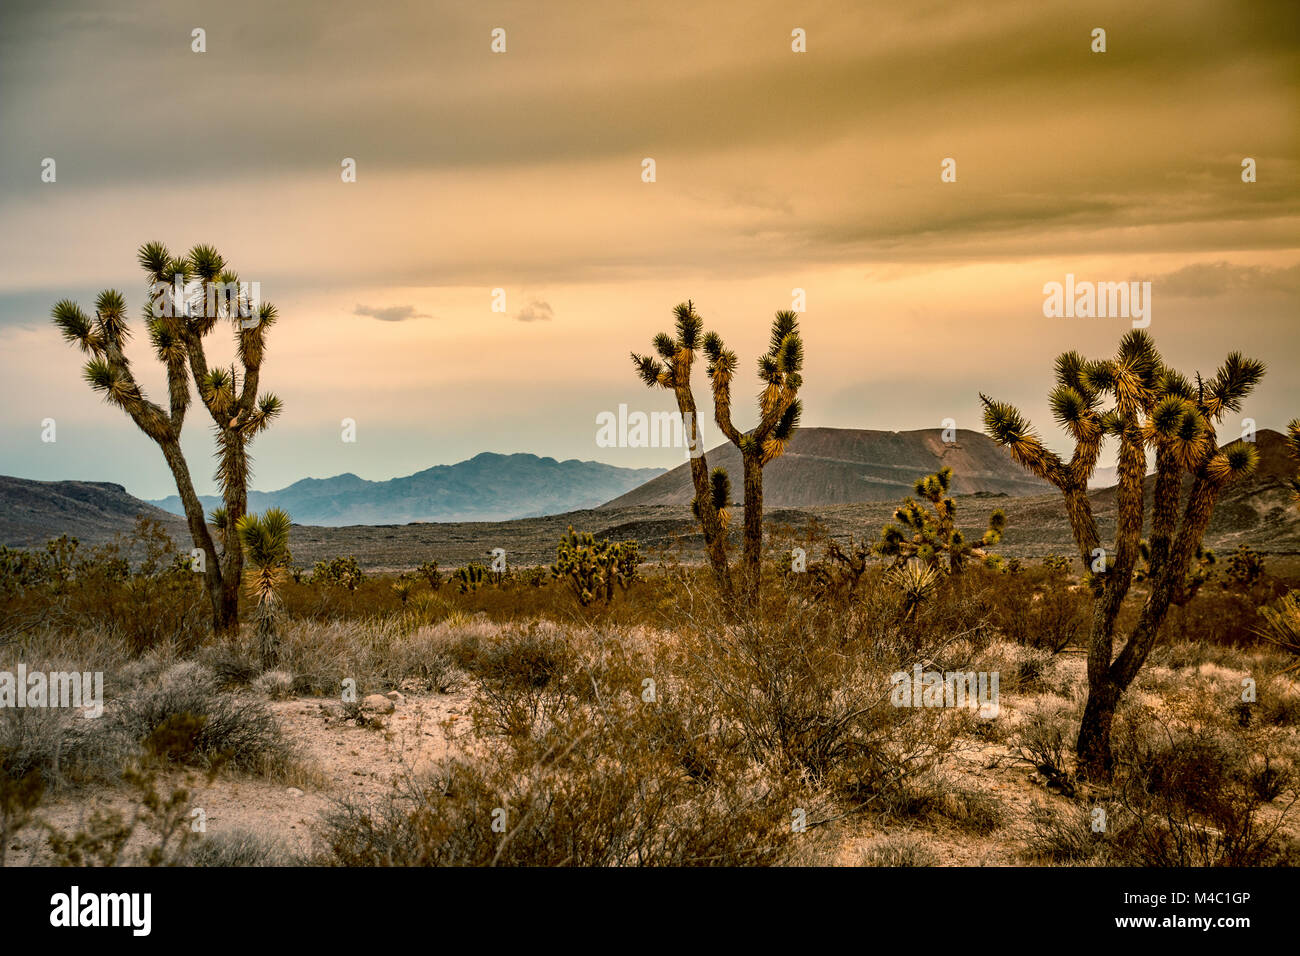 Joshua Trees with hills in the background in the USA Stock Photo